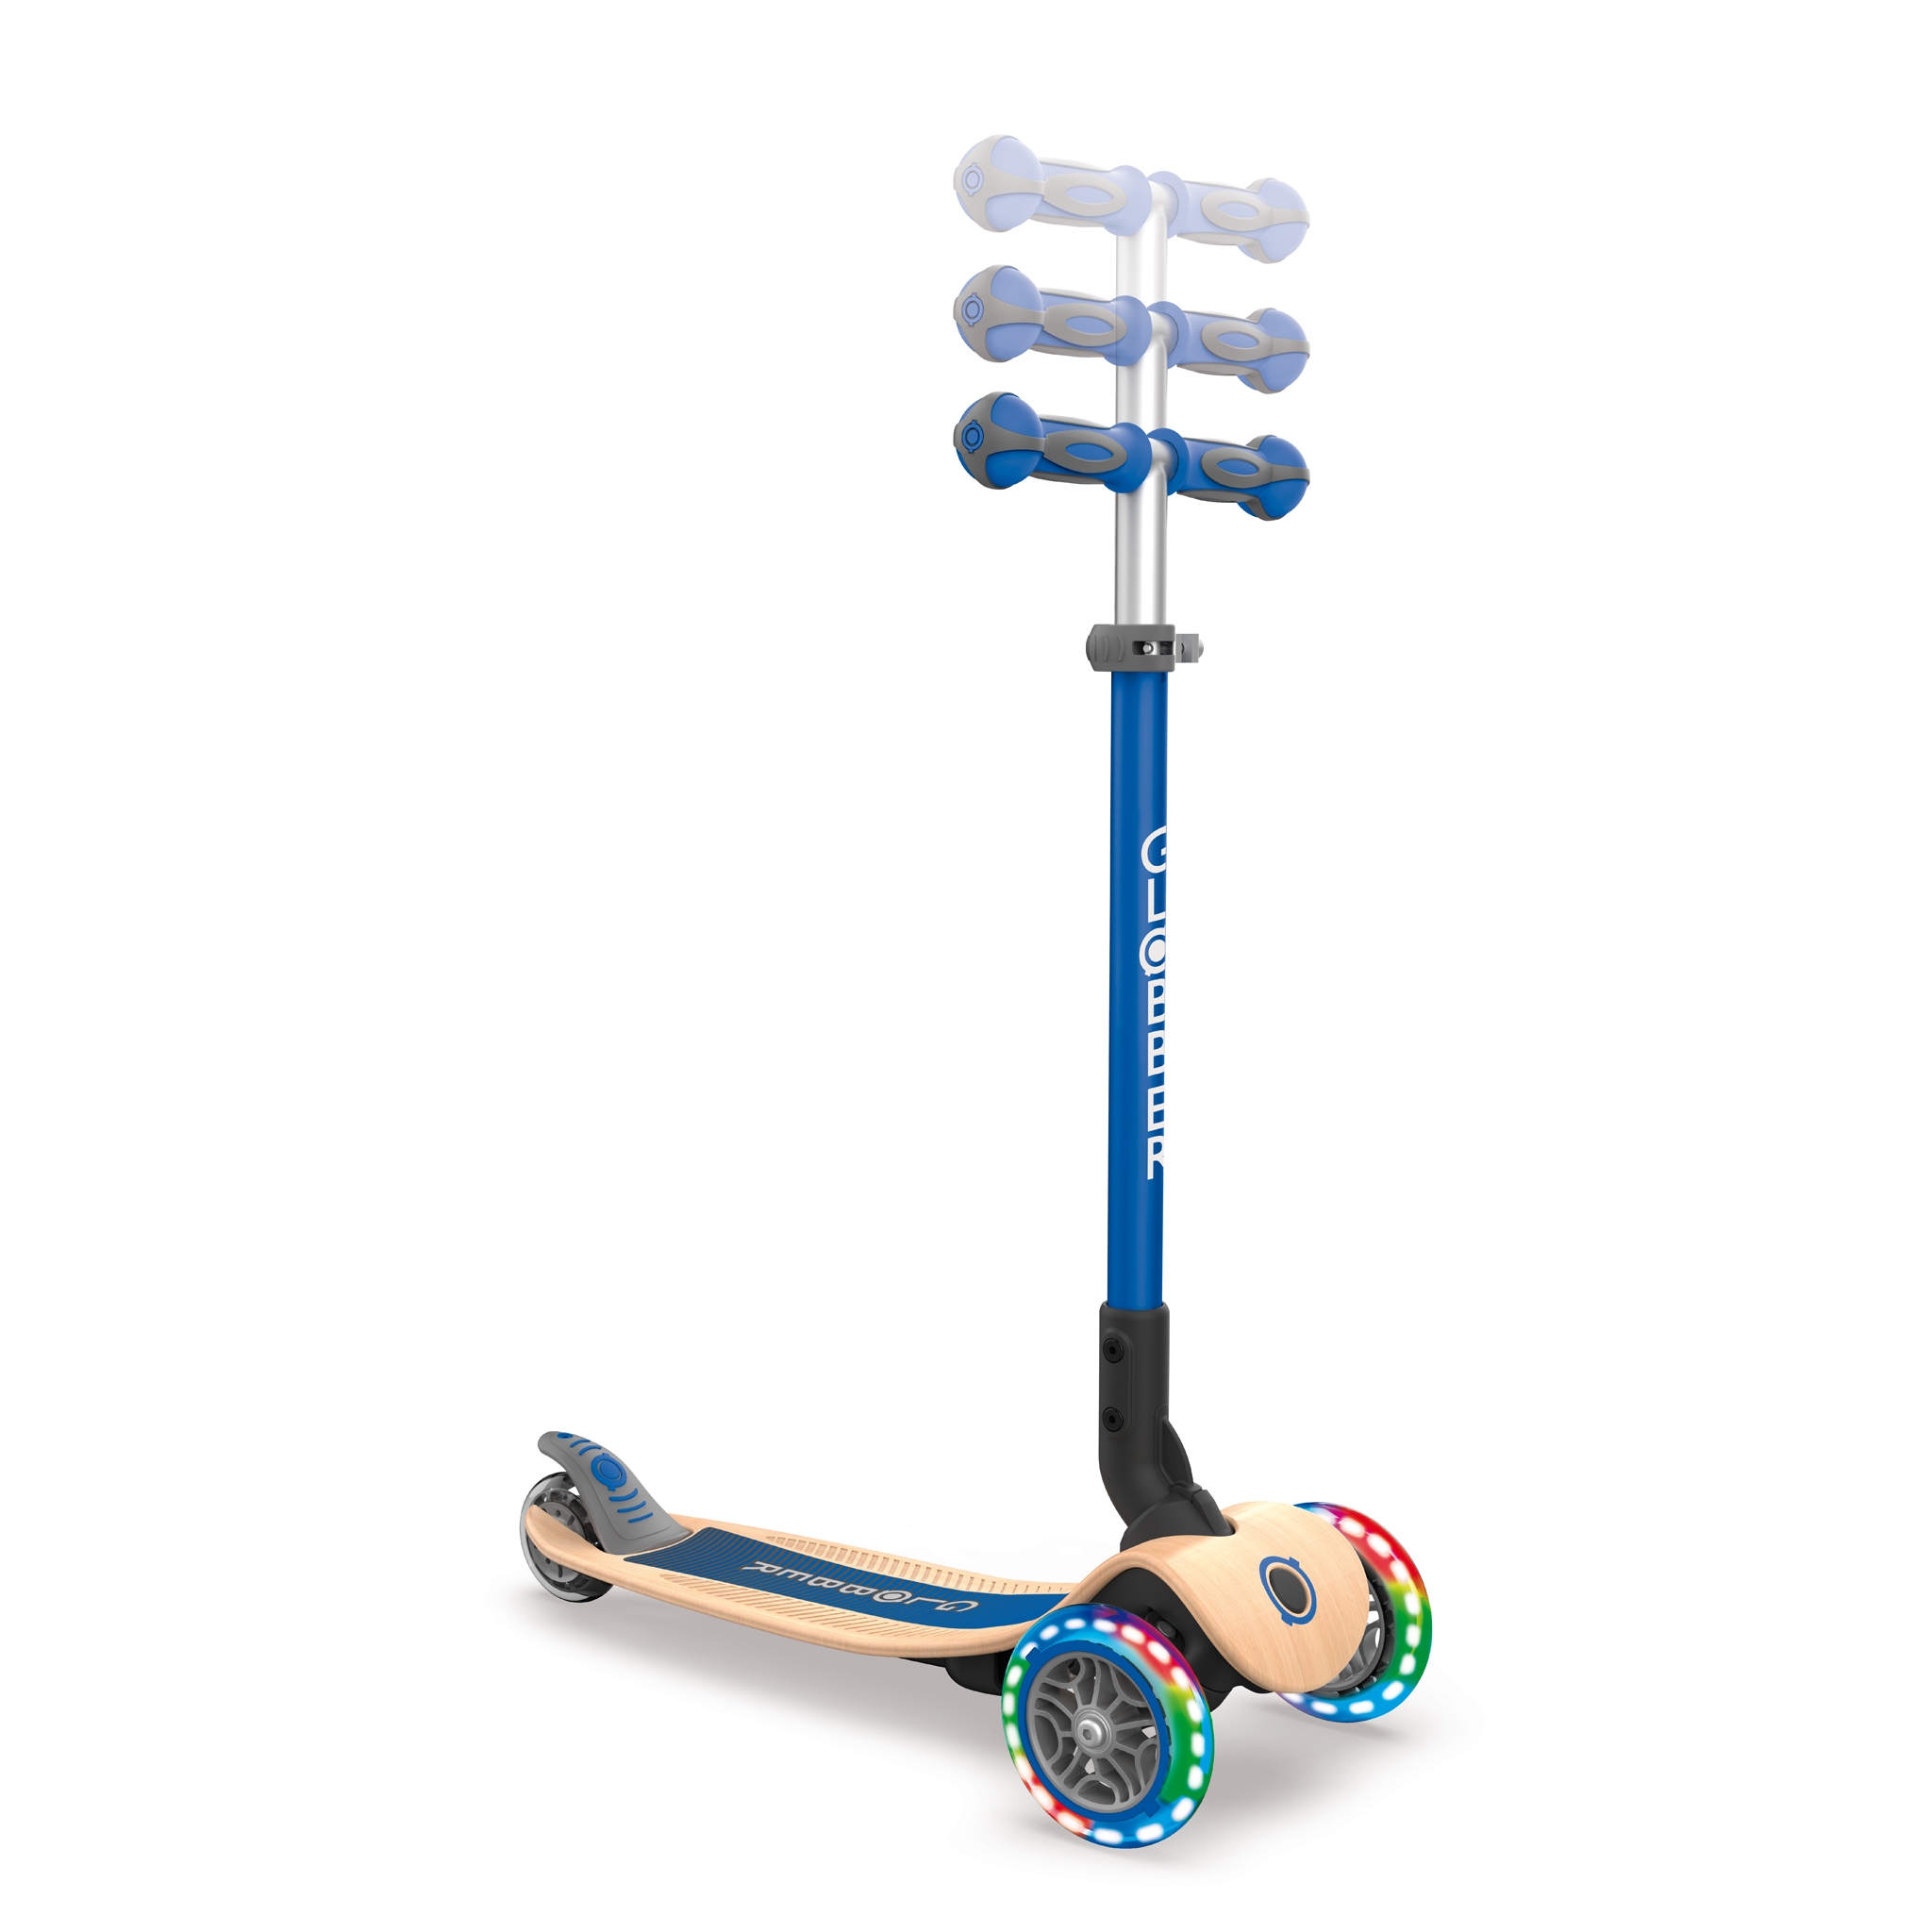 PRIMO-FOLDABLE-WOOD-LIGHTS-3-wheel-foldable-light-up-scooter-with-wooden-scooter-deck-and-3-height-adjustable-T-bar_navy-blue 1